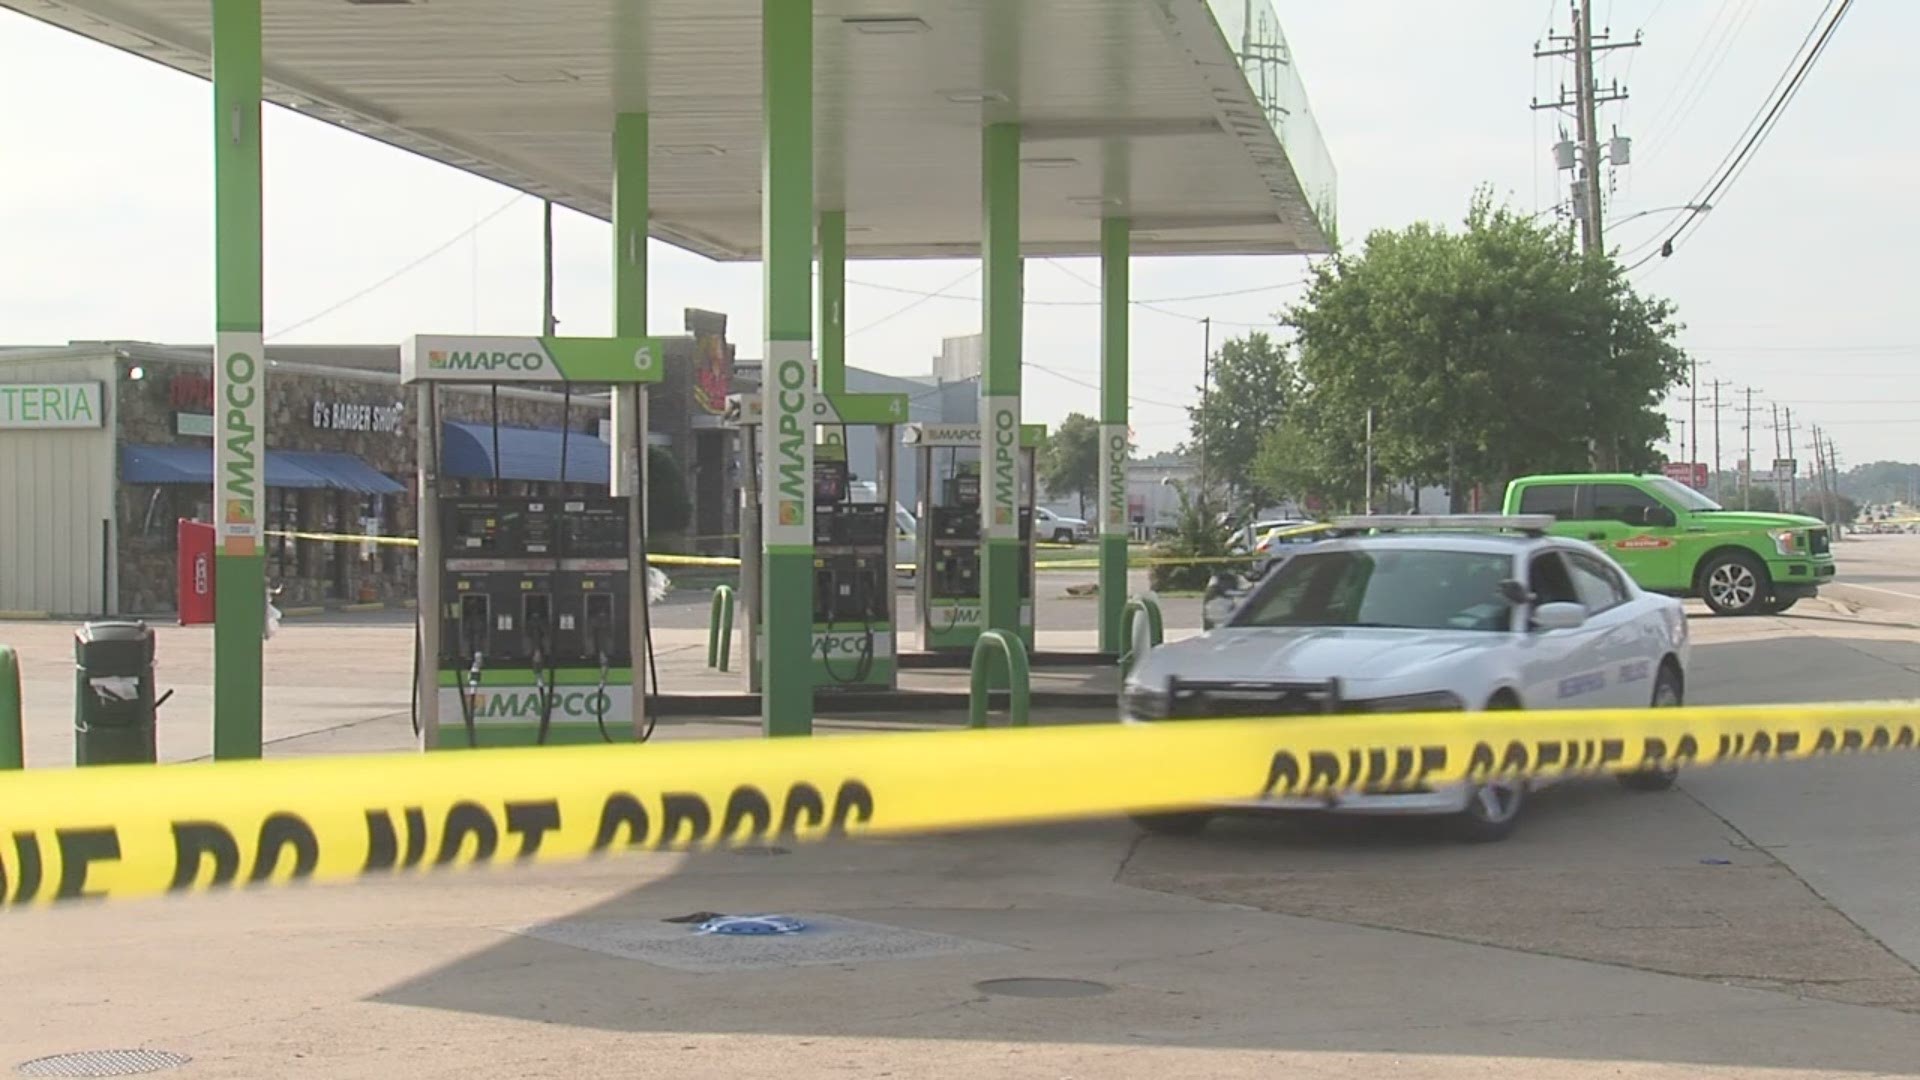 The shooting happened early Friday morning at the gas station on Whitten.